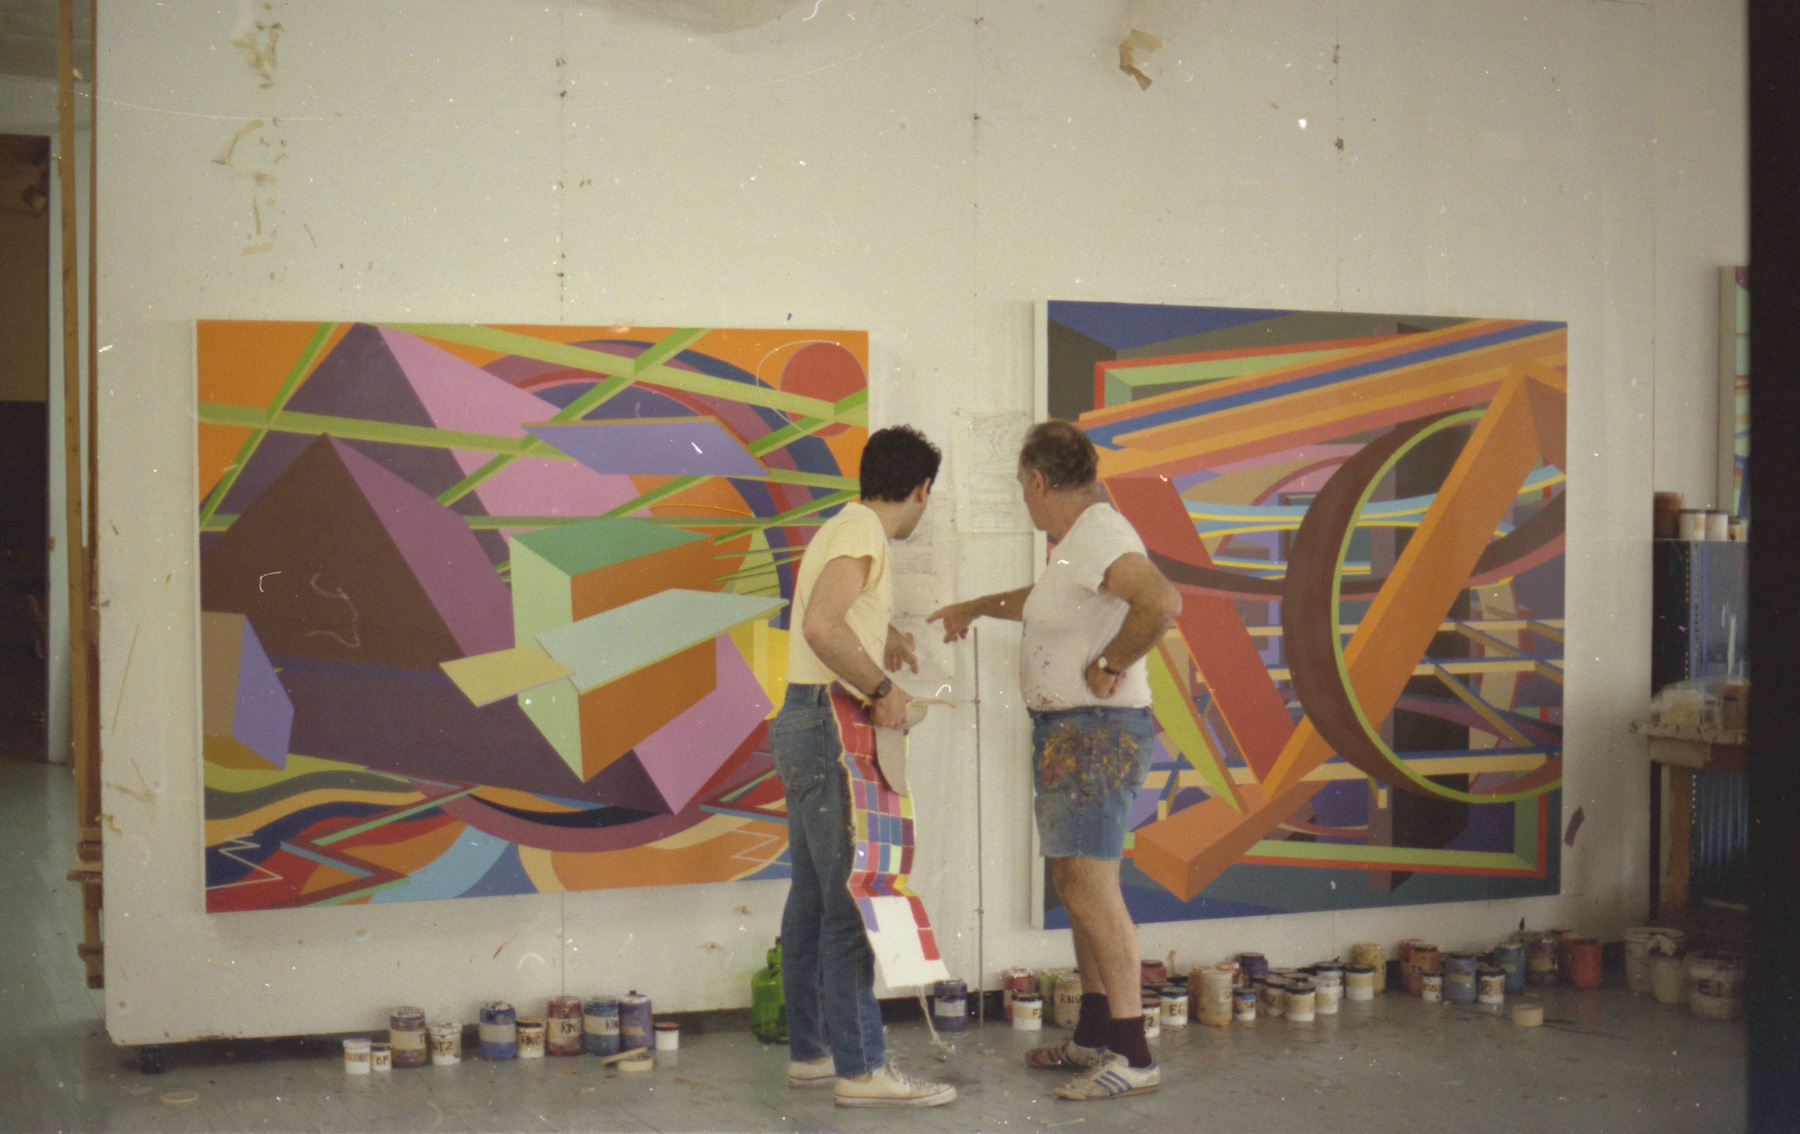 Two men having a conversation in the middle of two large abstract paintings.